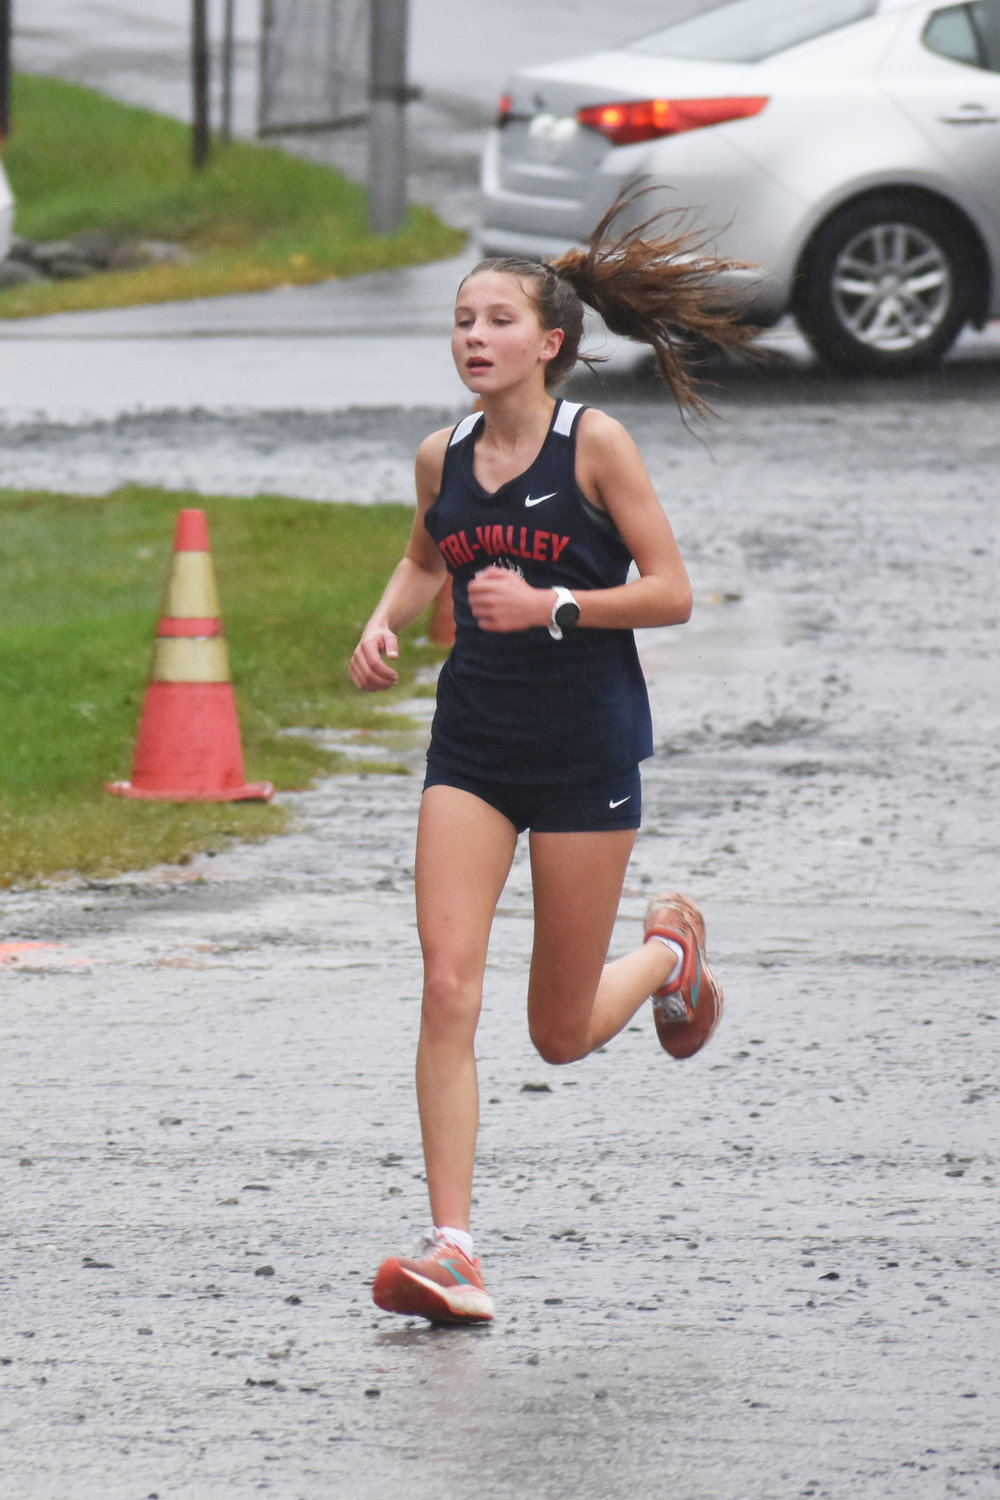 Eighth Grader Anna Furman has sped out to another first place finish for Tri-Valley.